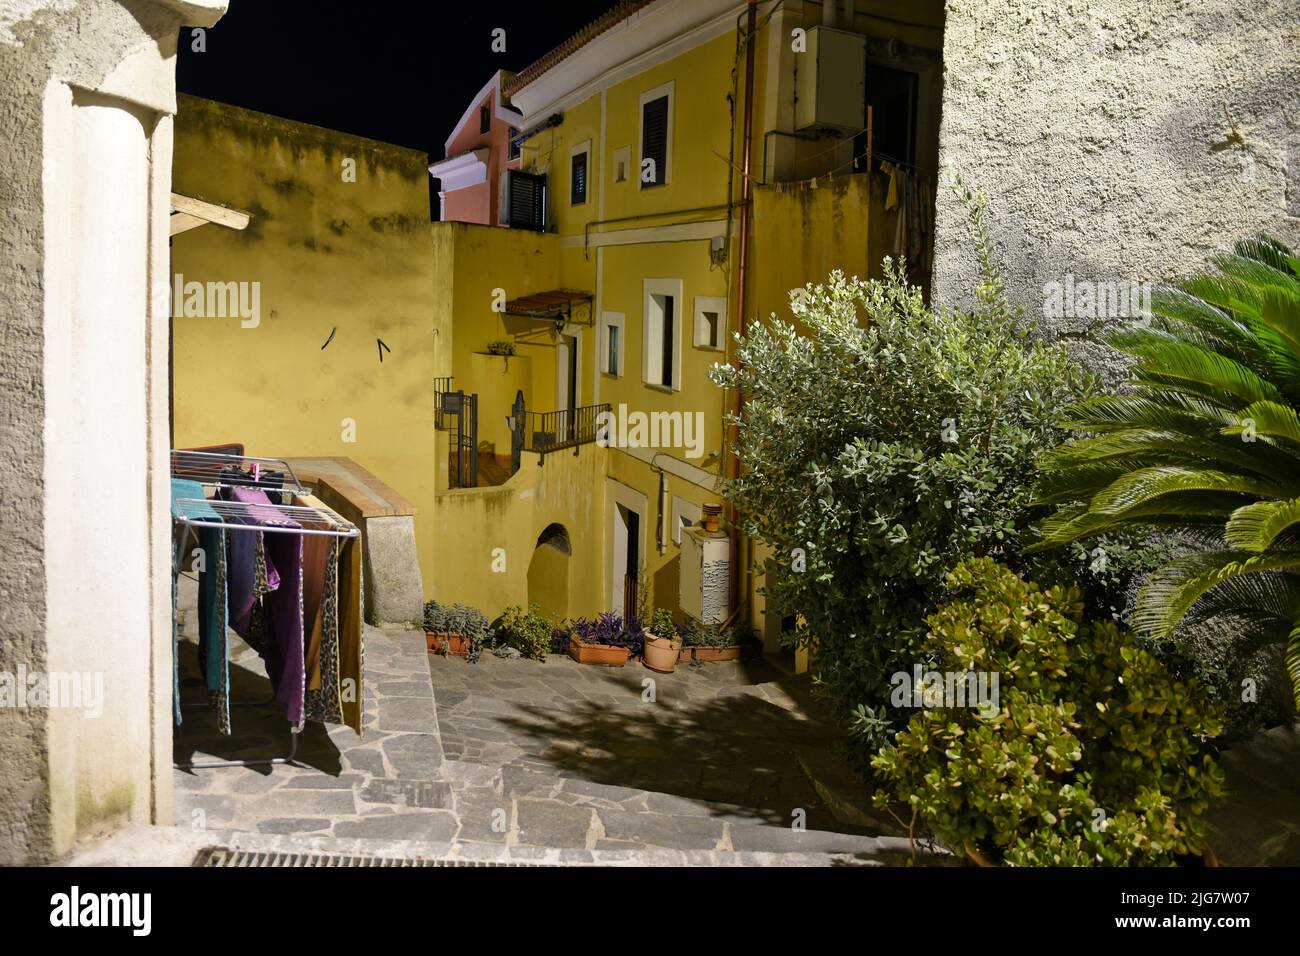 A narrow street with old buildings in San Nicola Arcella, village of Calabria region, Italy Stock Photo